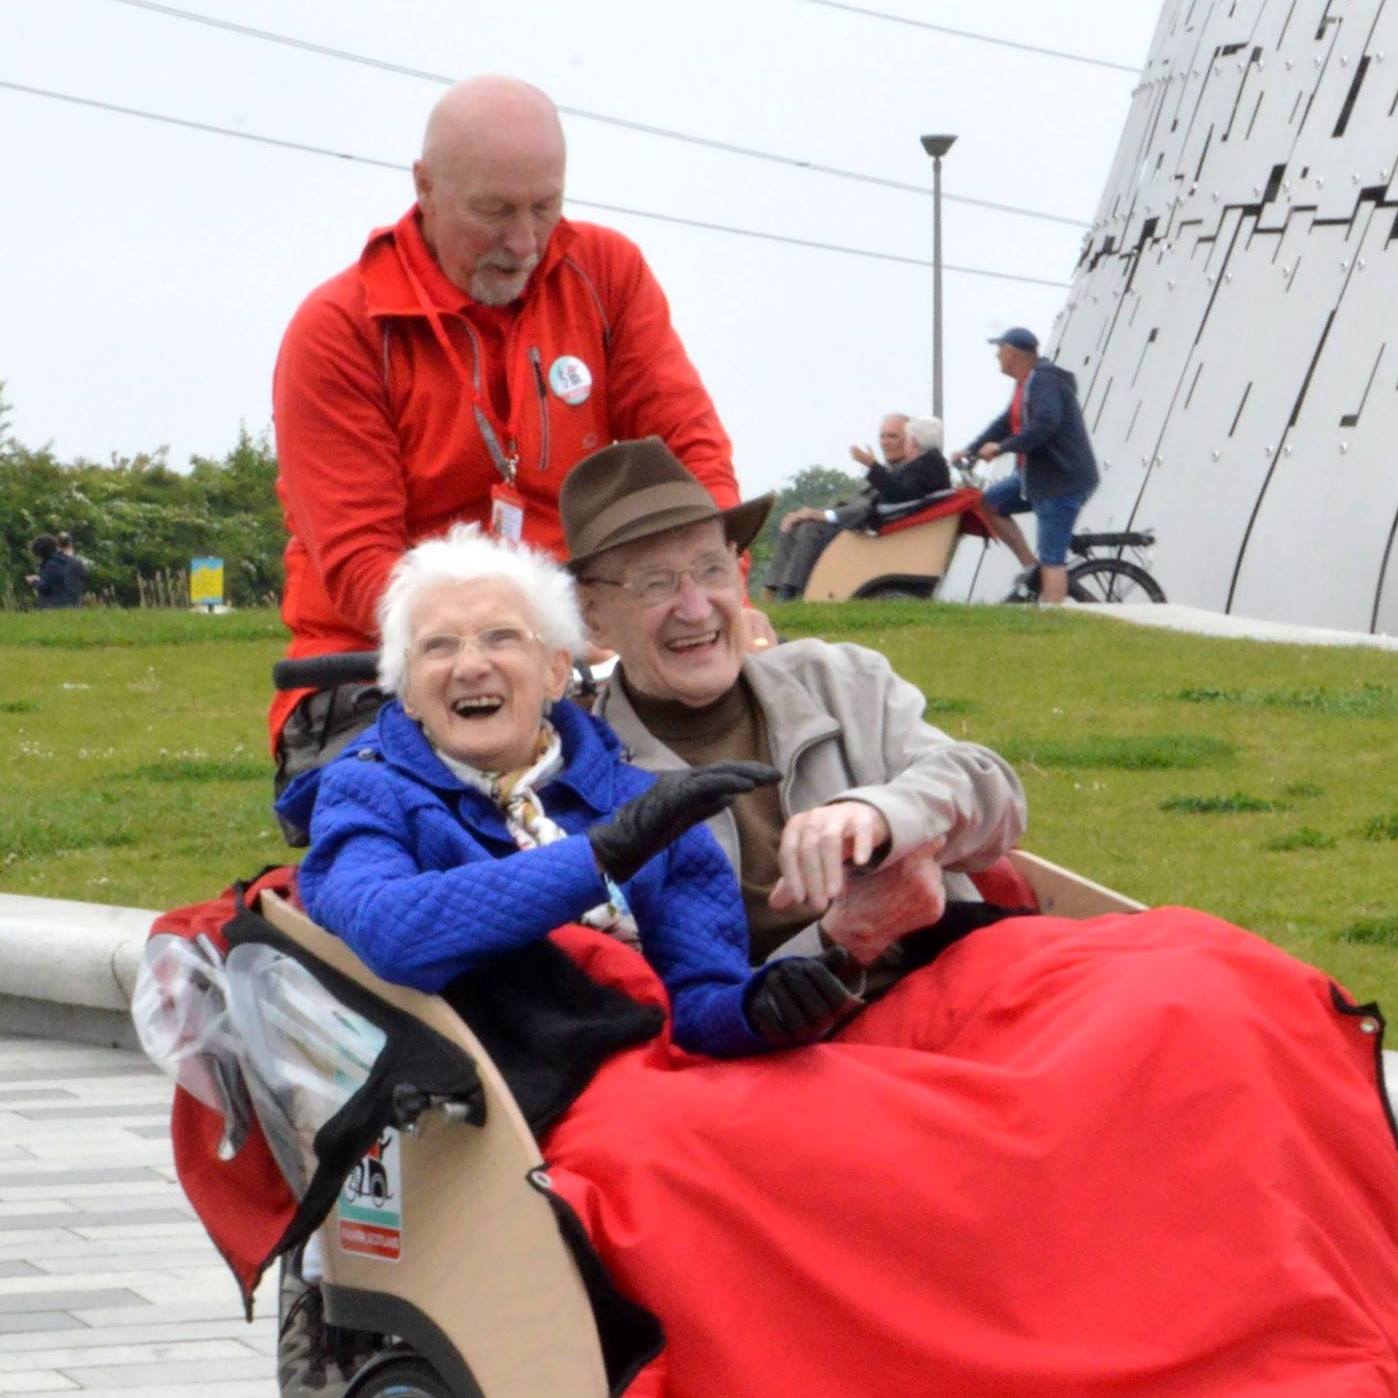 an elderly man and woman smiling together as they ride on a trishaw through the nonprofit cycling without age